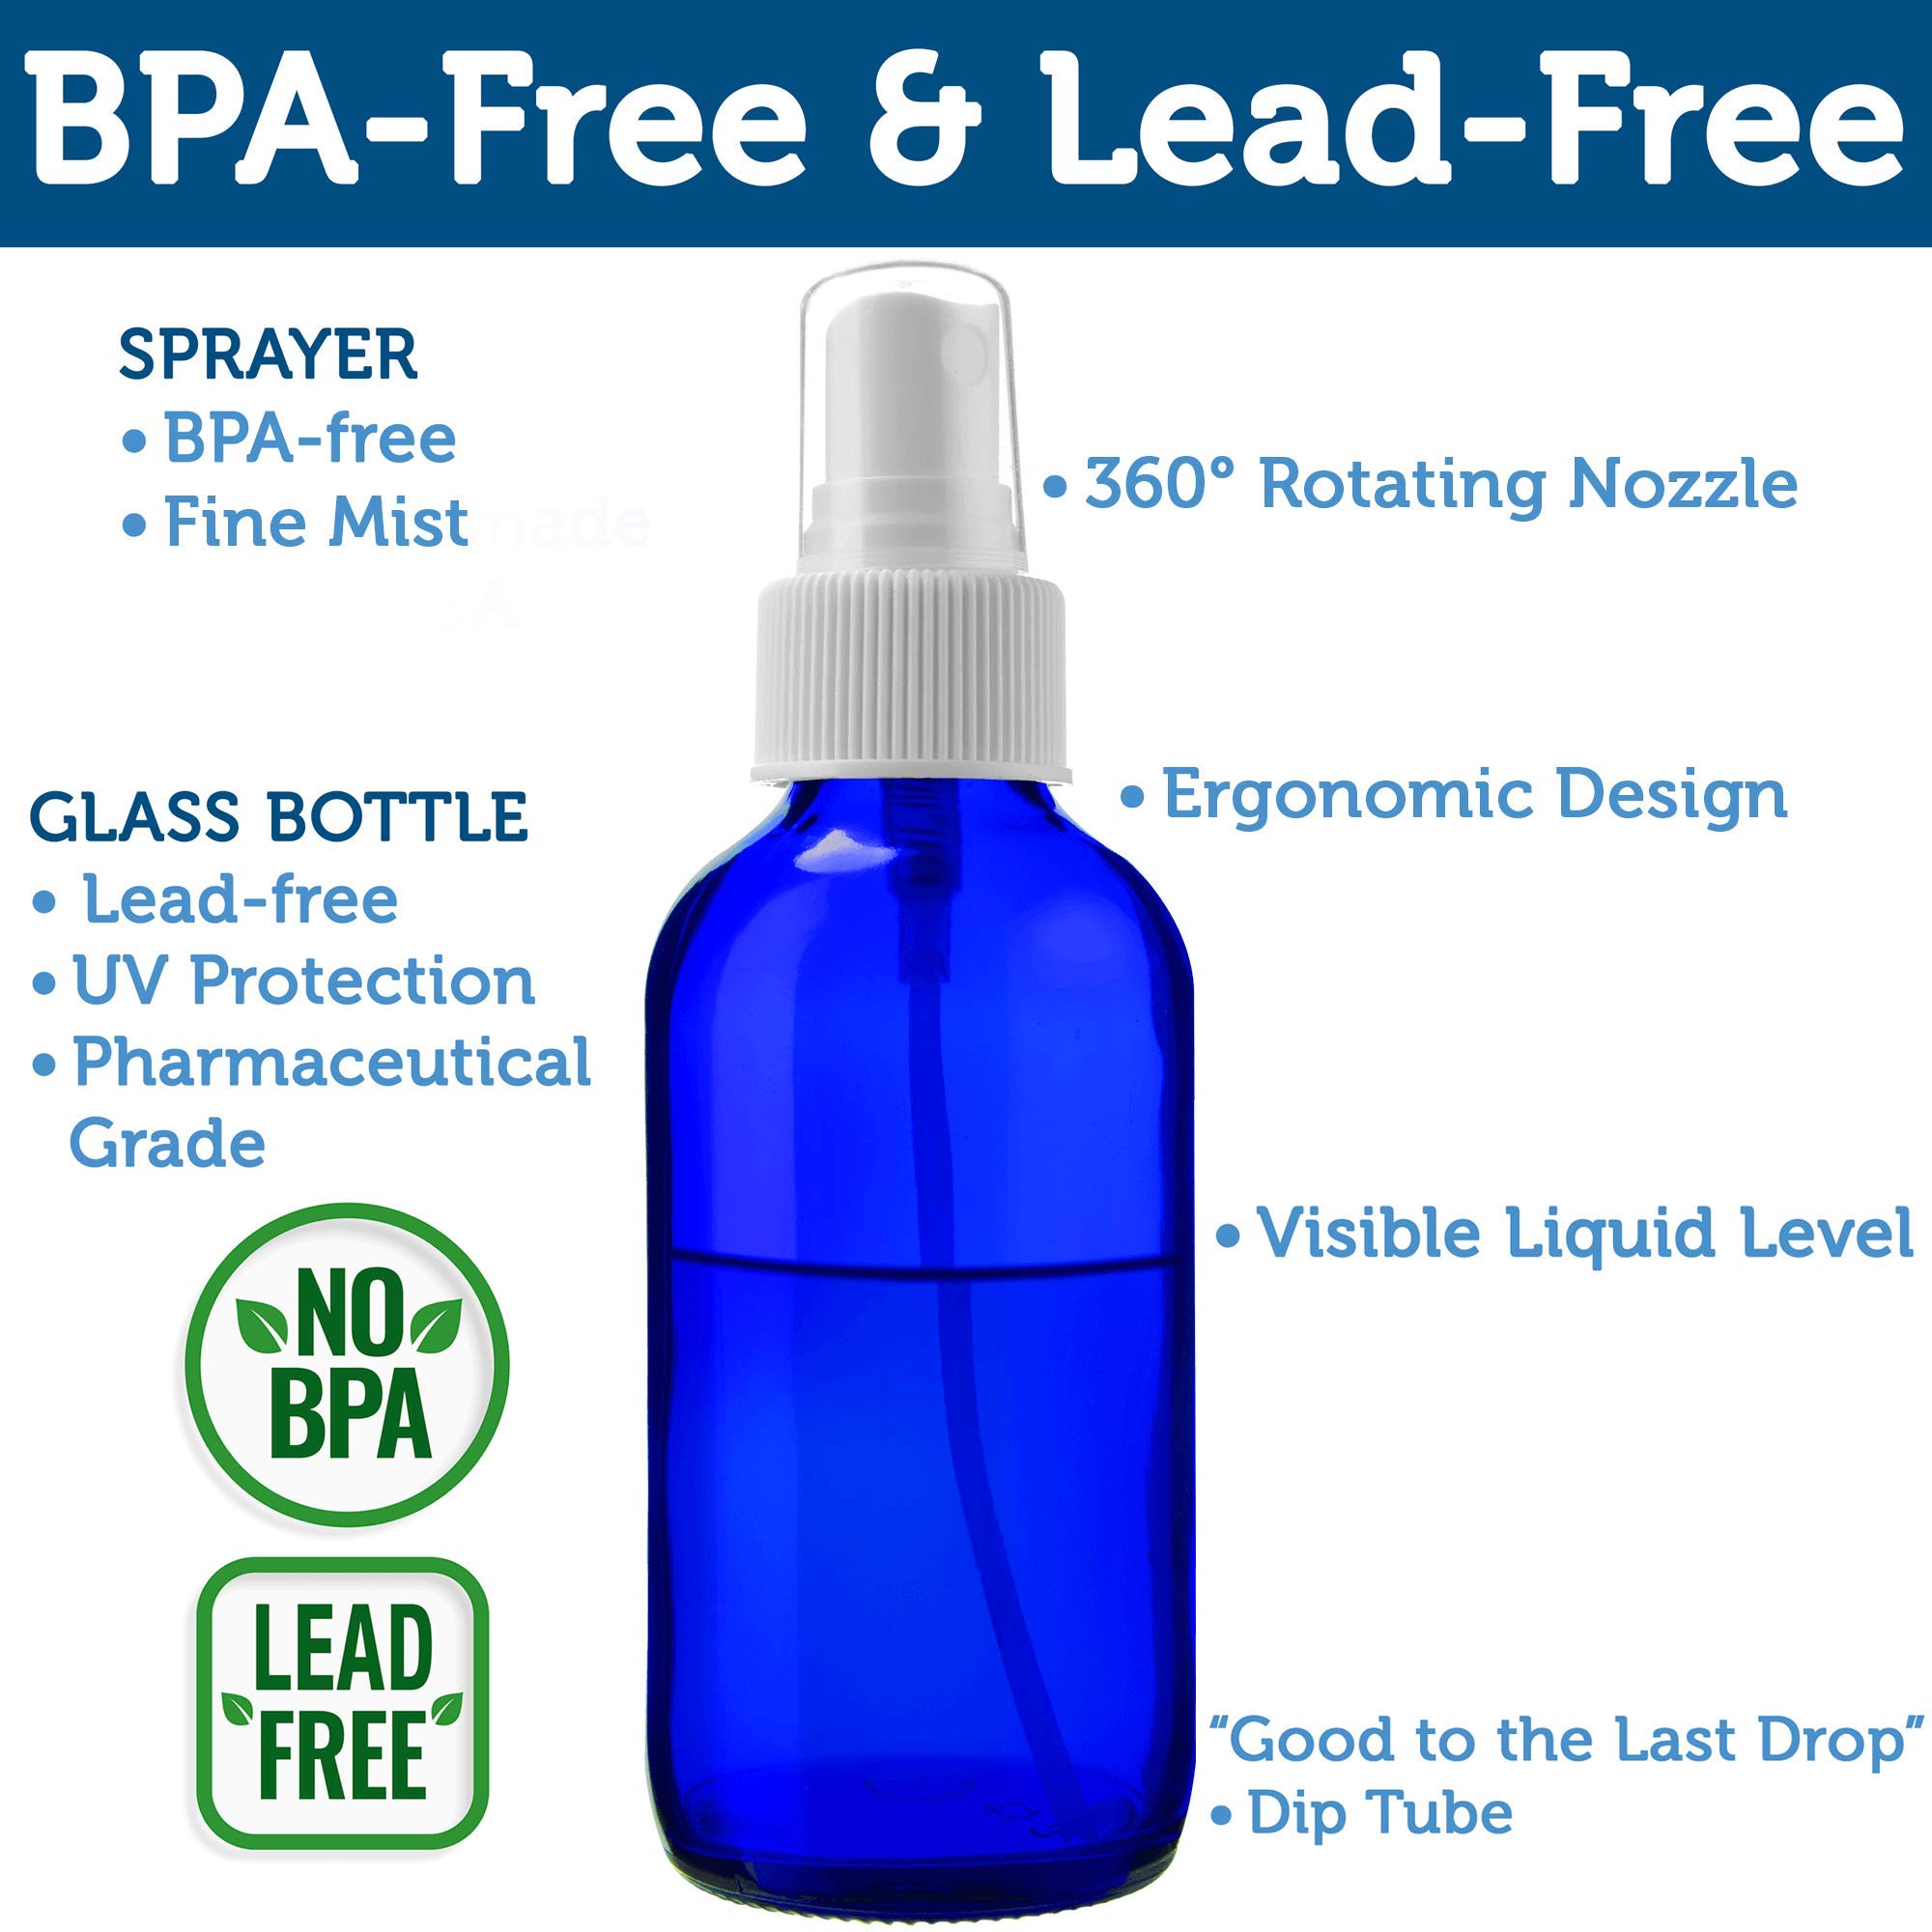 2 Empty Blue Glass Spray Bottles - 4oz Refillable Bottle is Great for Essential Oils, Organic Beauty Solutions, Homemade Cleaning and Aromatherapy - Small Portable Misters with Caps and Labels - 2 Pack